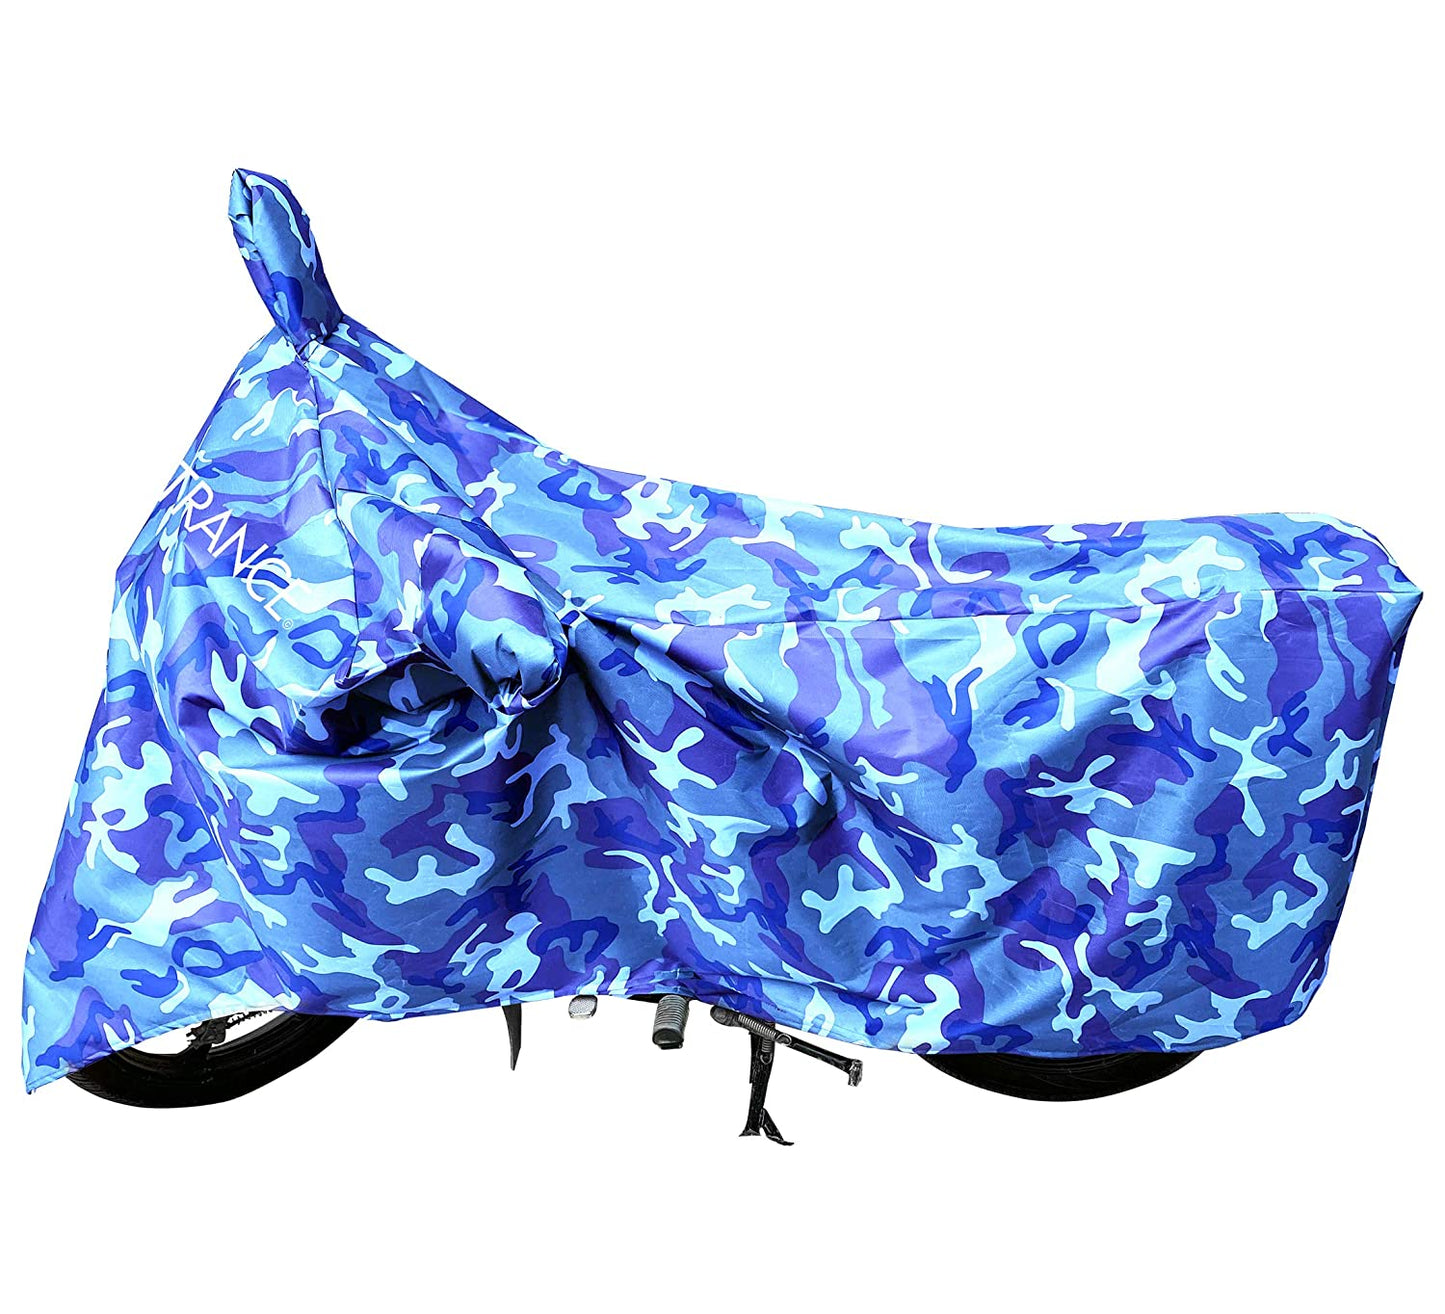 MotoTrance Jungle Bike Body Covers For Yamaha FZ - Interlock-Stitched Waterproof and Heat Resistant with Mirror Pockets